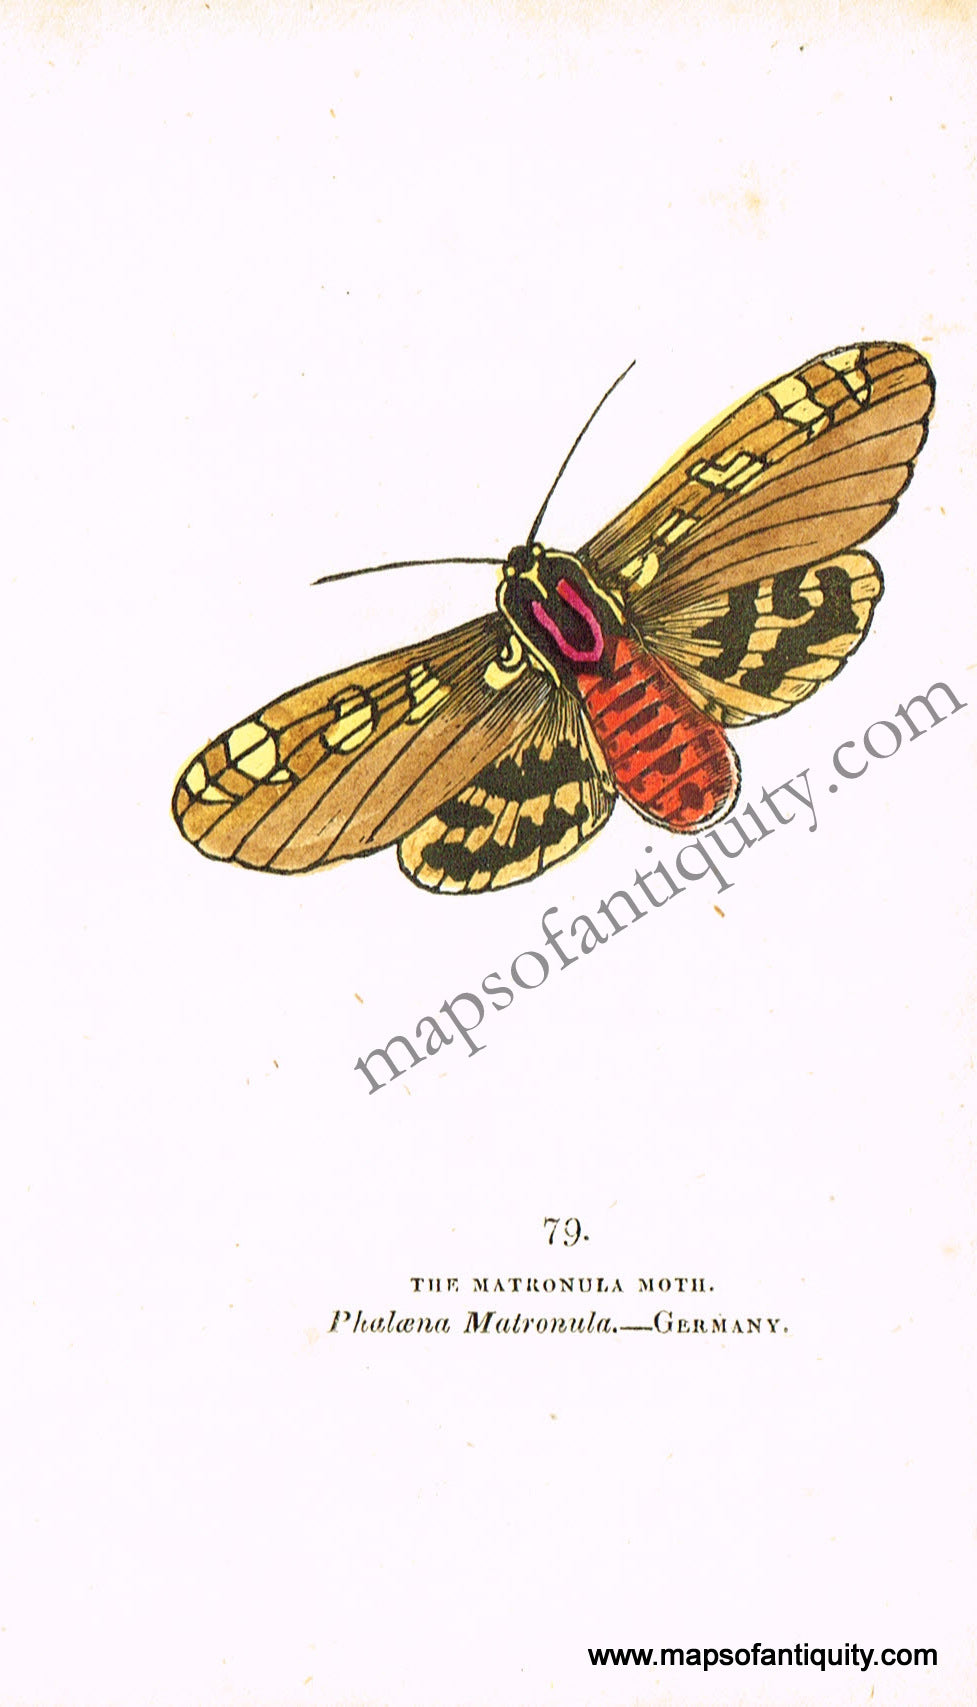 Antique-Hand-Colored-Engraved-Illustration-The-Matronula-Moth-Antique-Prints-Natural-History-Insects-1832-Brown-Maps-Of-Antiquity